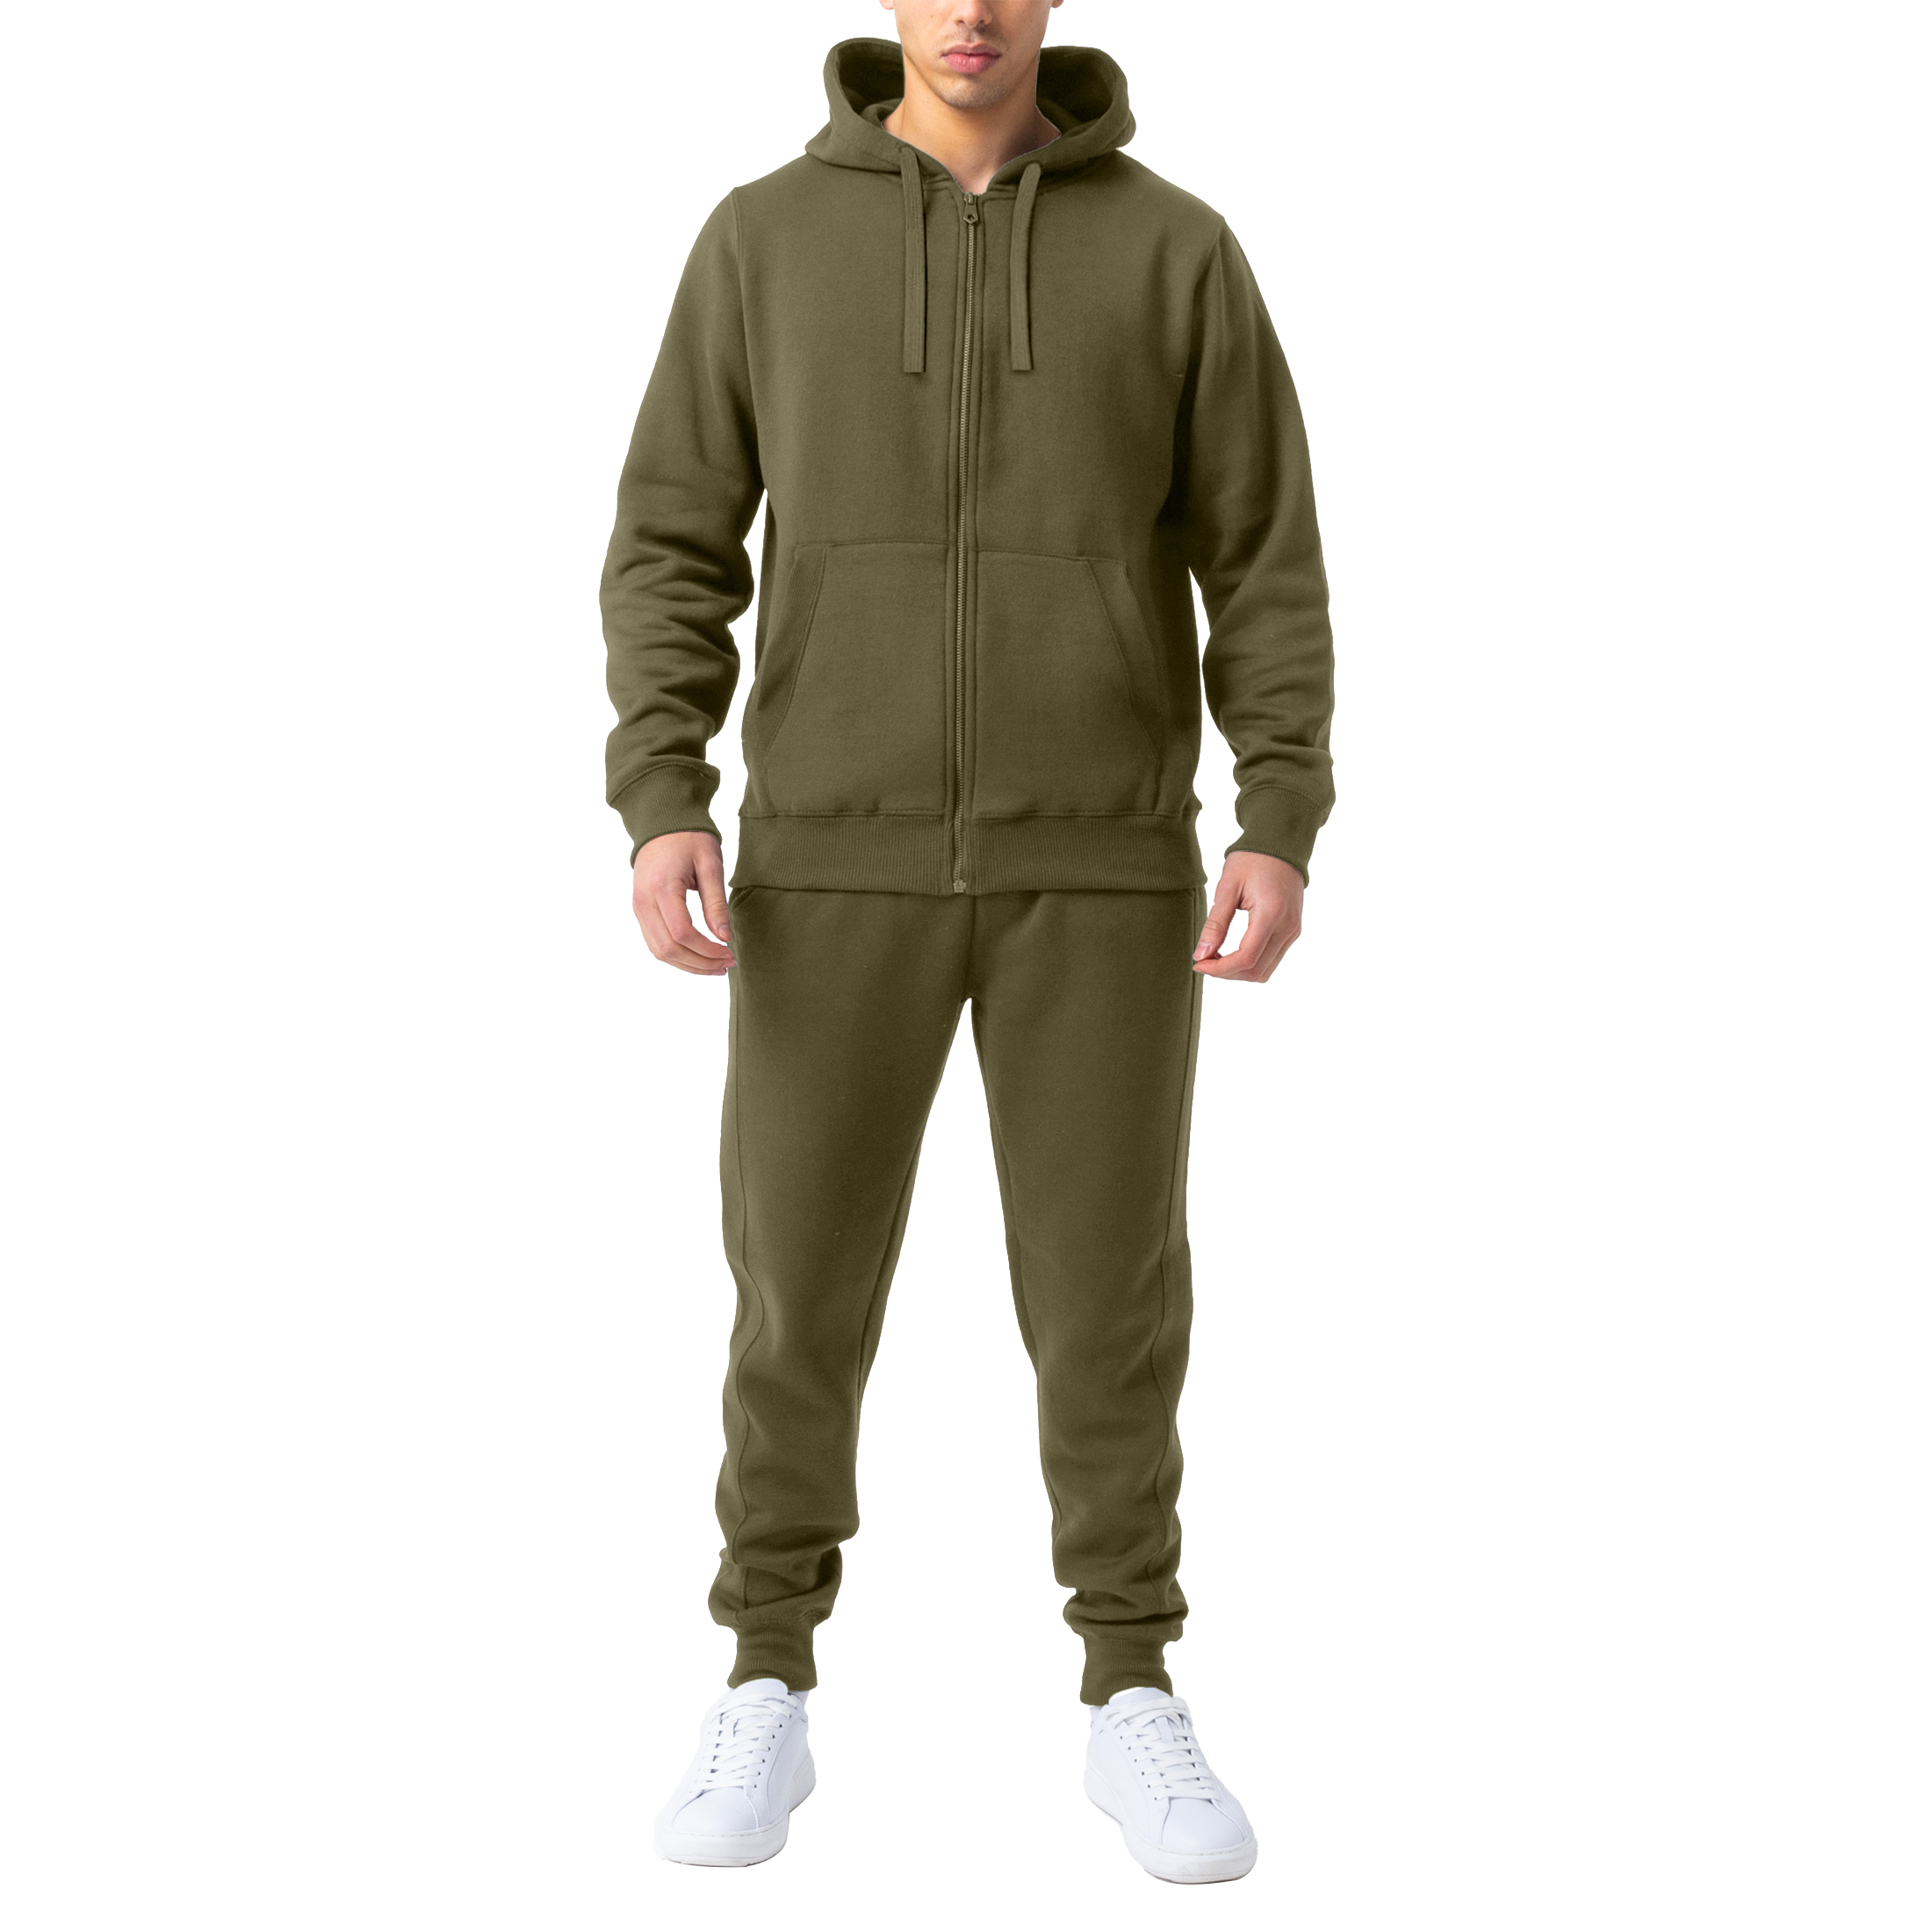 Men's Casual Jogging Athletic Active Full Zip Up Tracksuit - Olive, 3X-Large